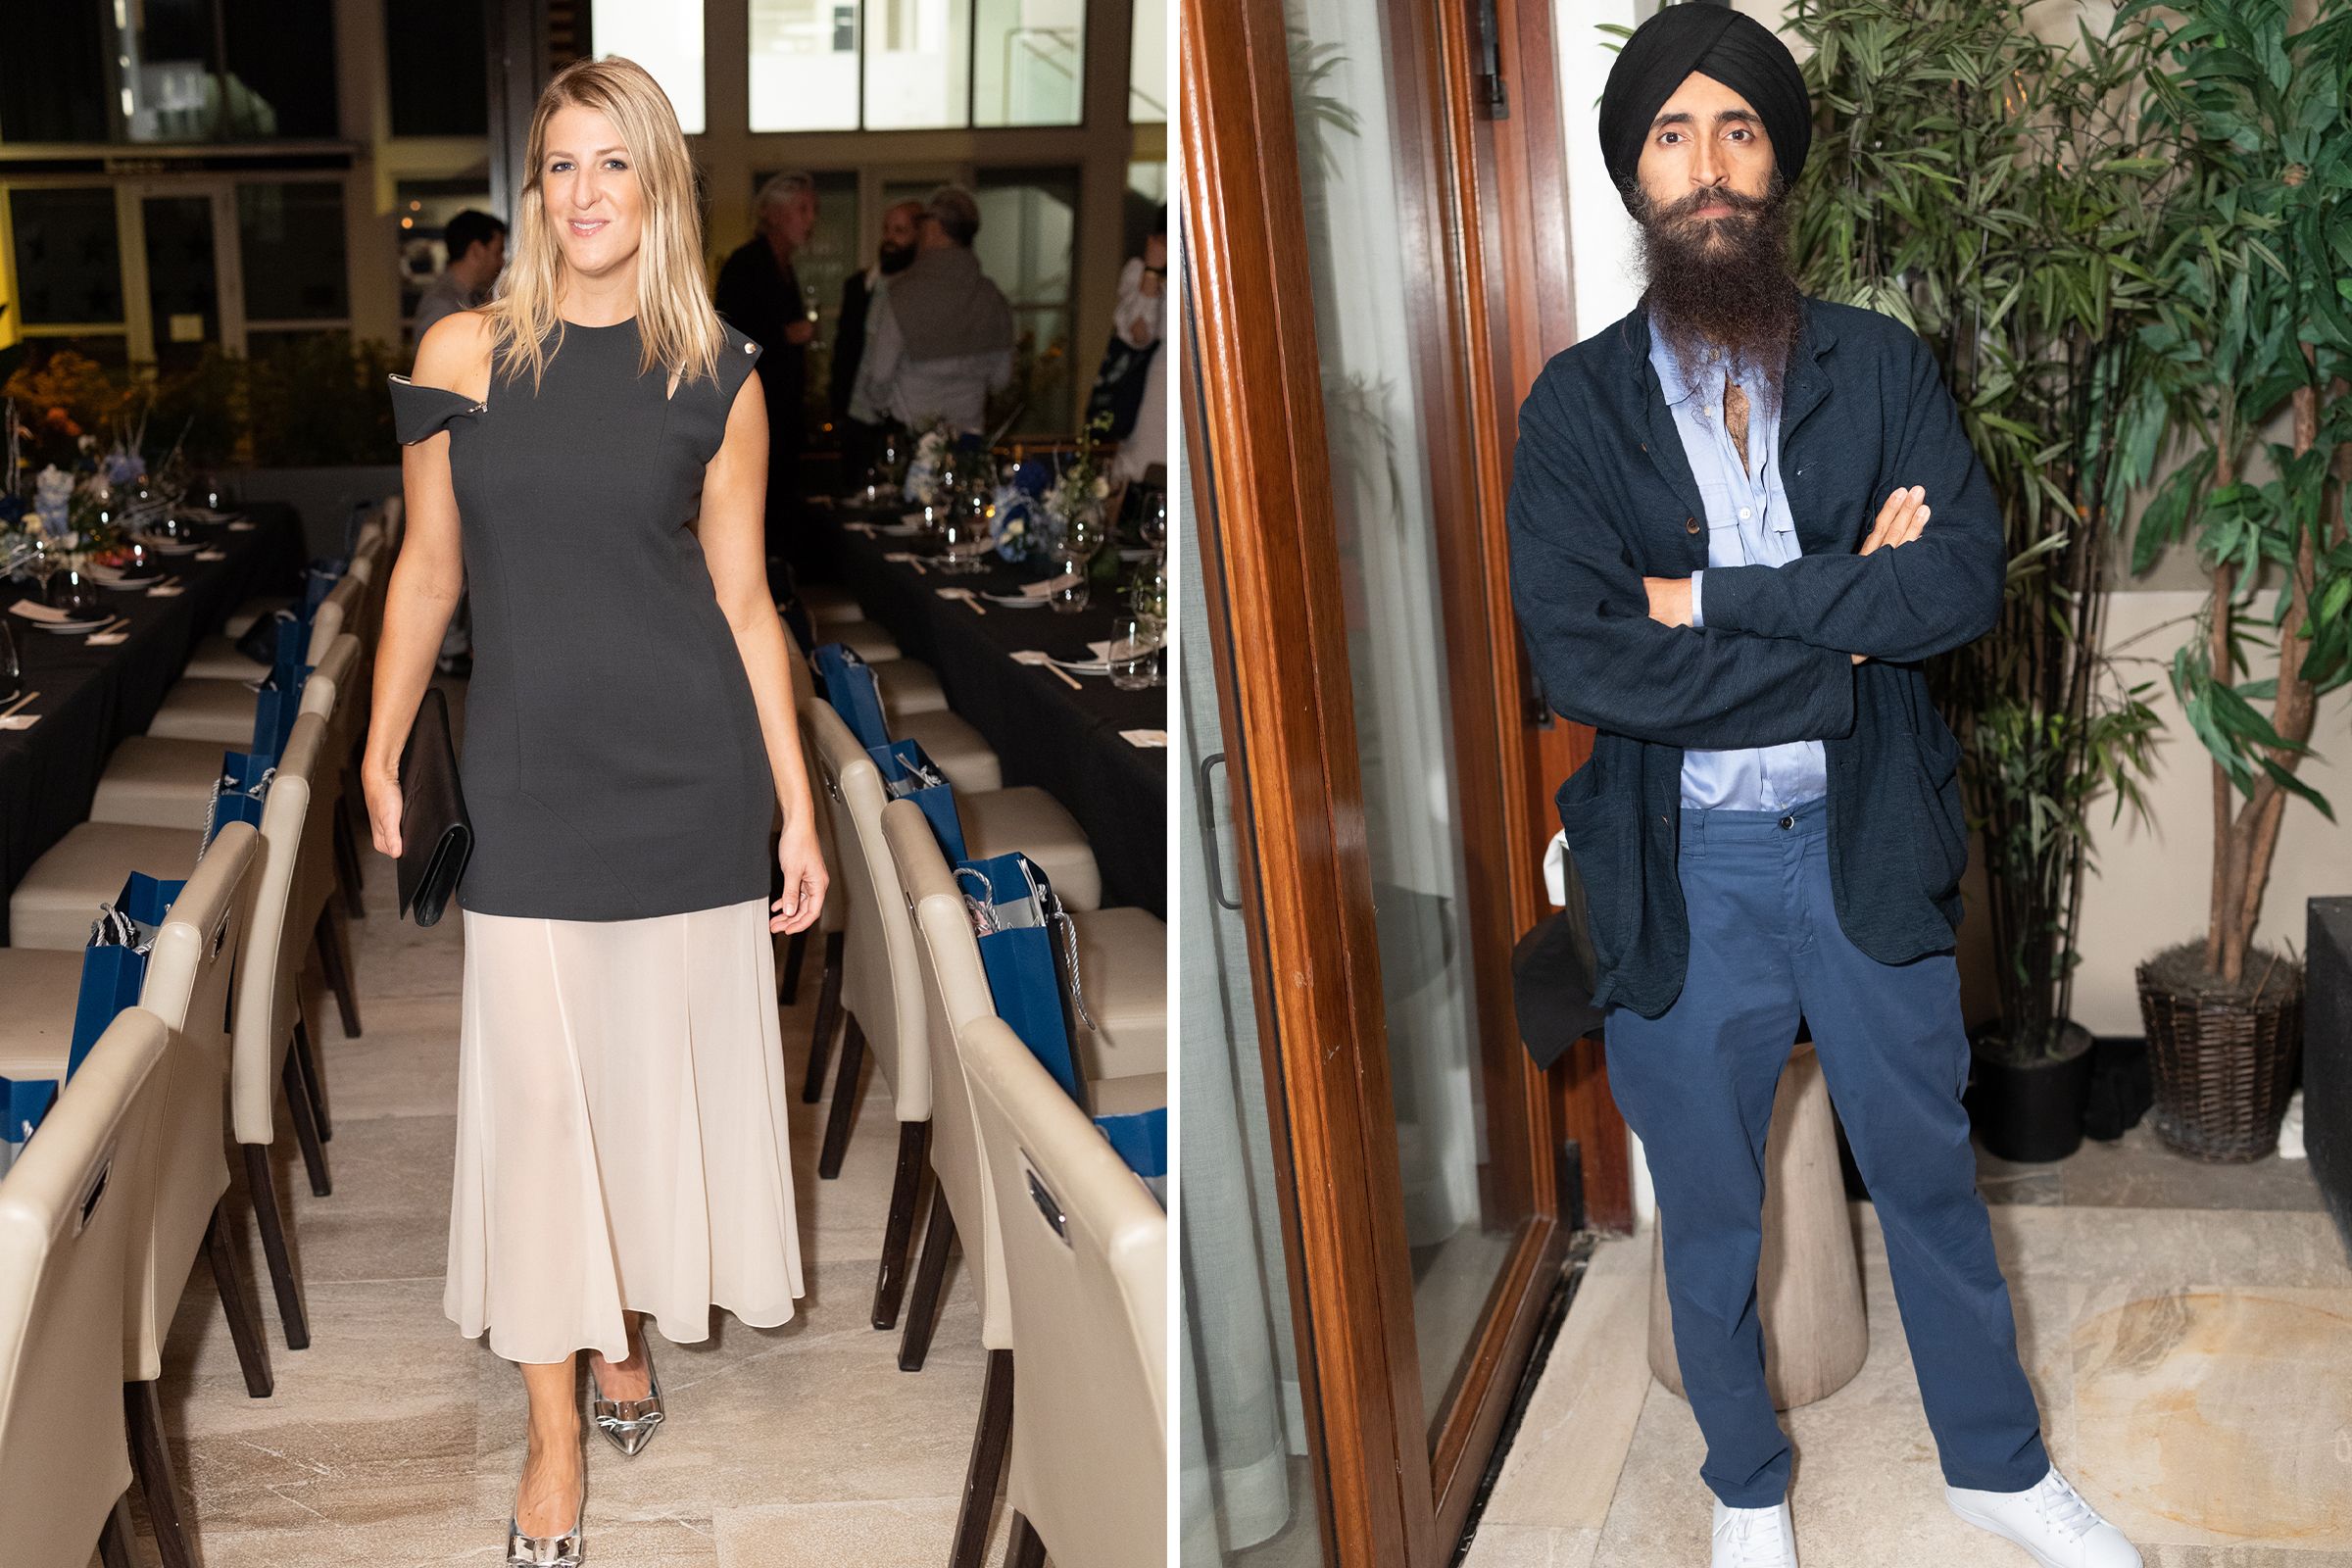 December 2022 | Left to right: Art Production Fund executive director Casey Fremont and designer and actor Waris Ahluwalia, two of the guests at a Grand Seiko dinner hosted by The Slowdown during Art Basel Miami Beach.